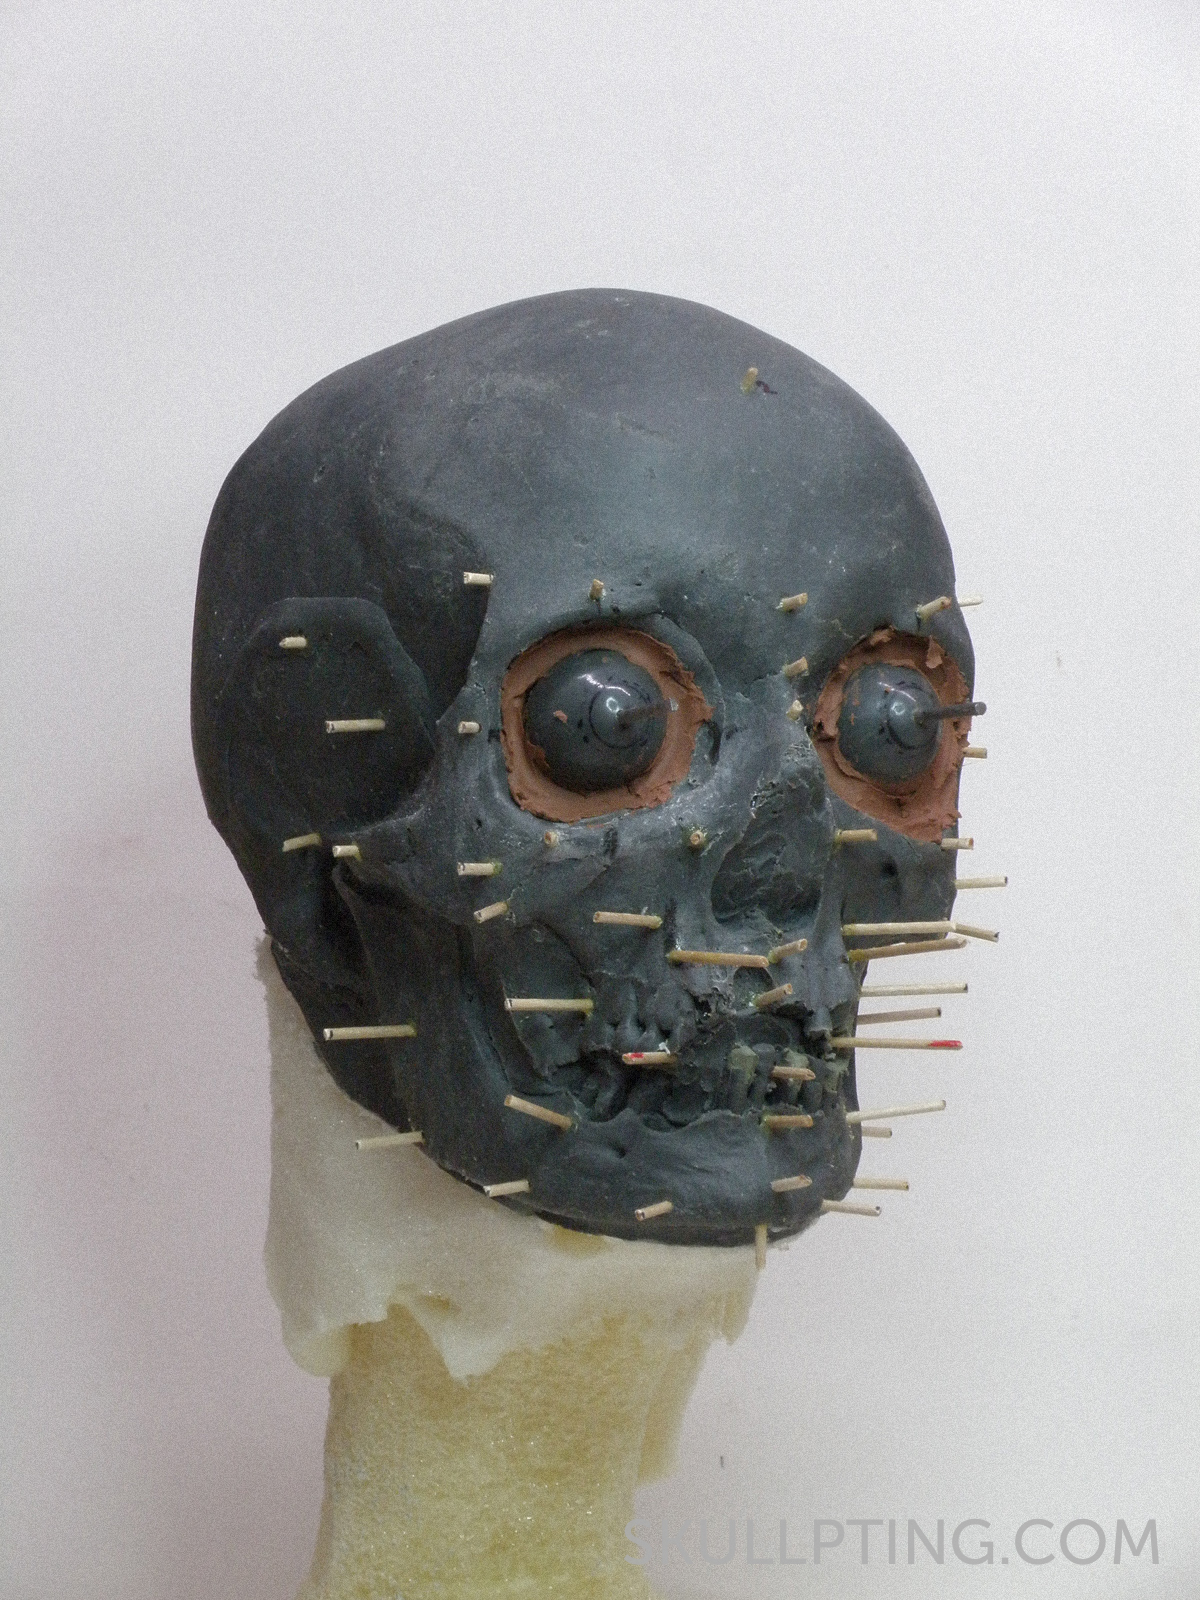 the replica of the skull with pegs to show the tissue thicknesses